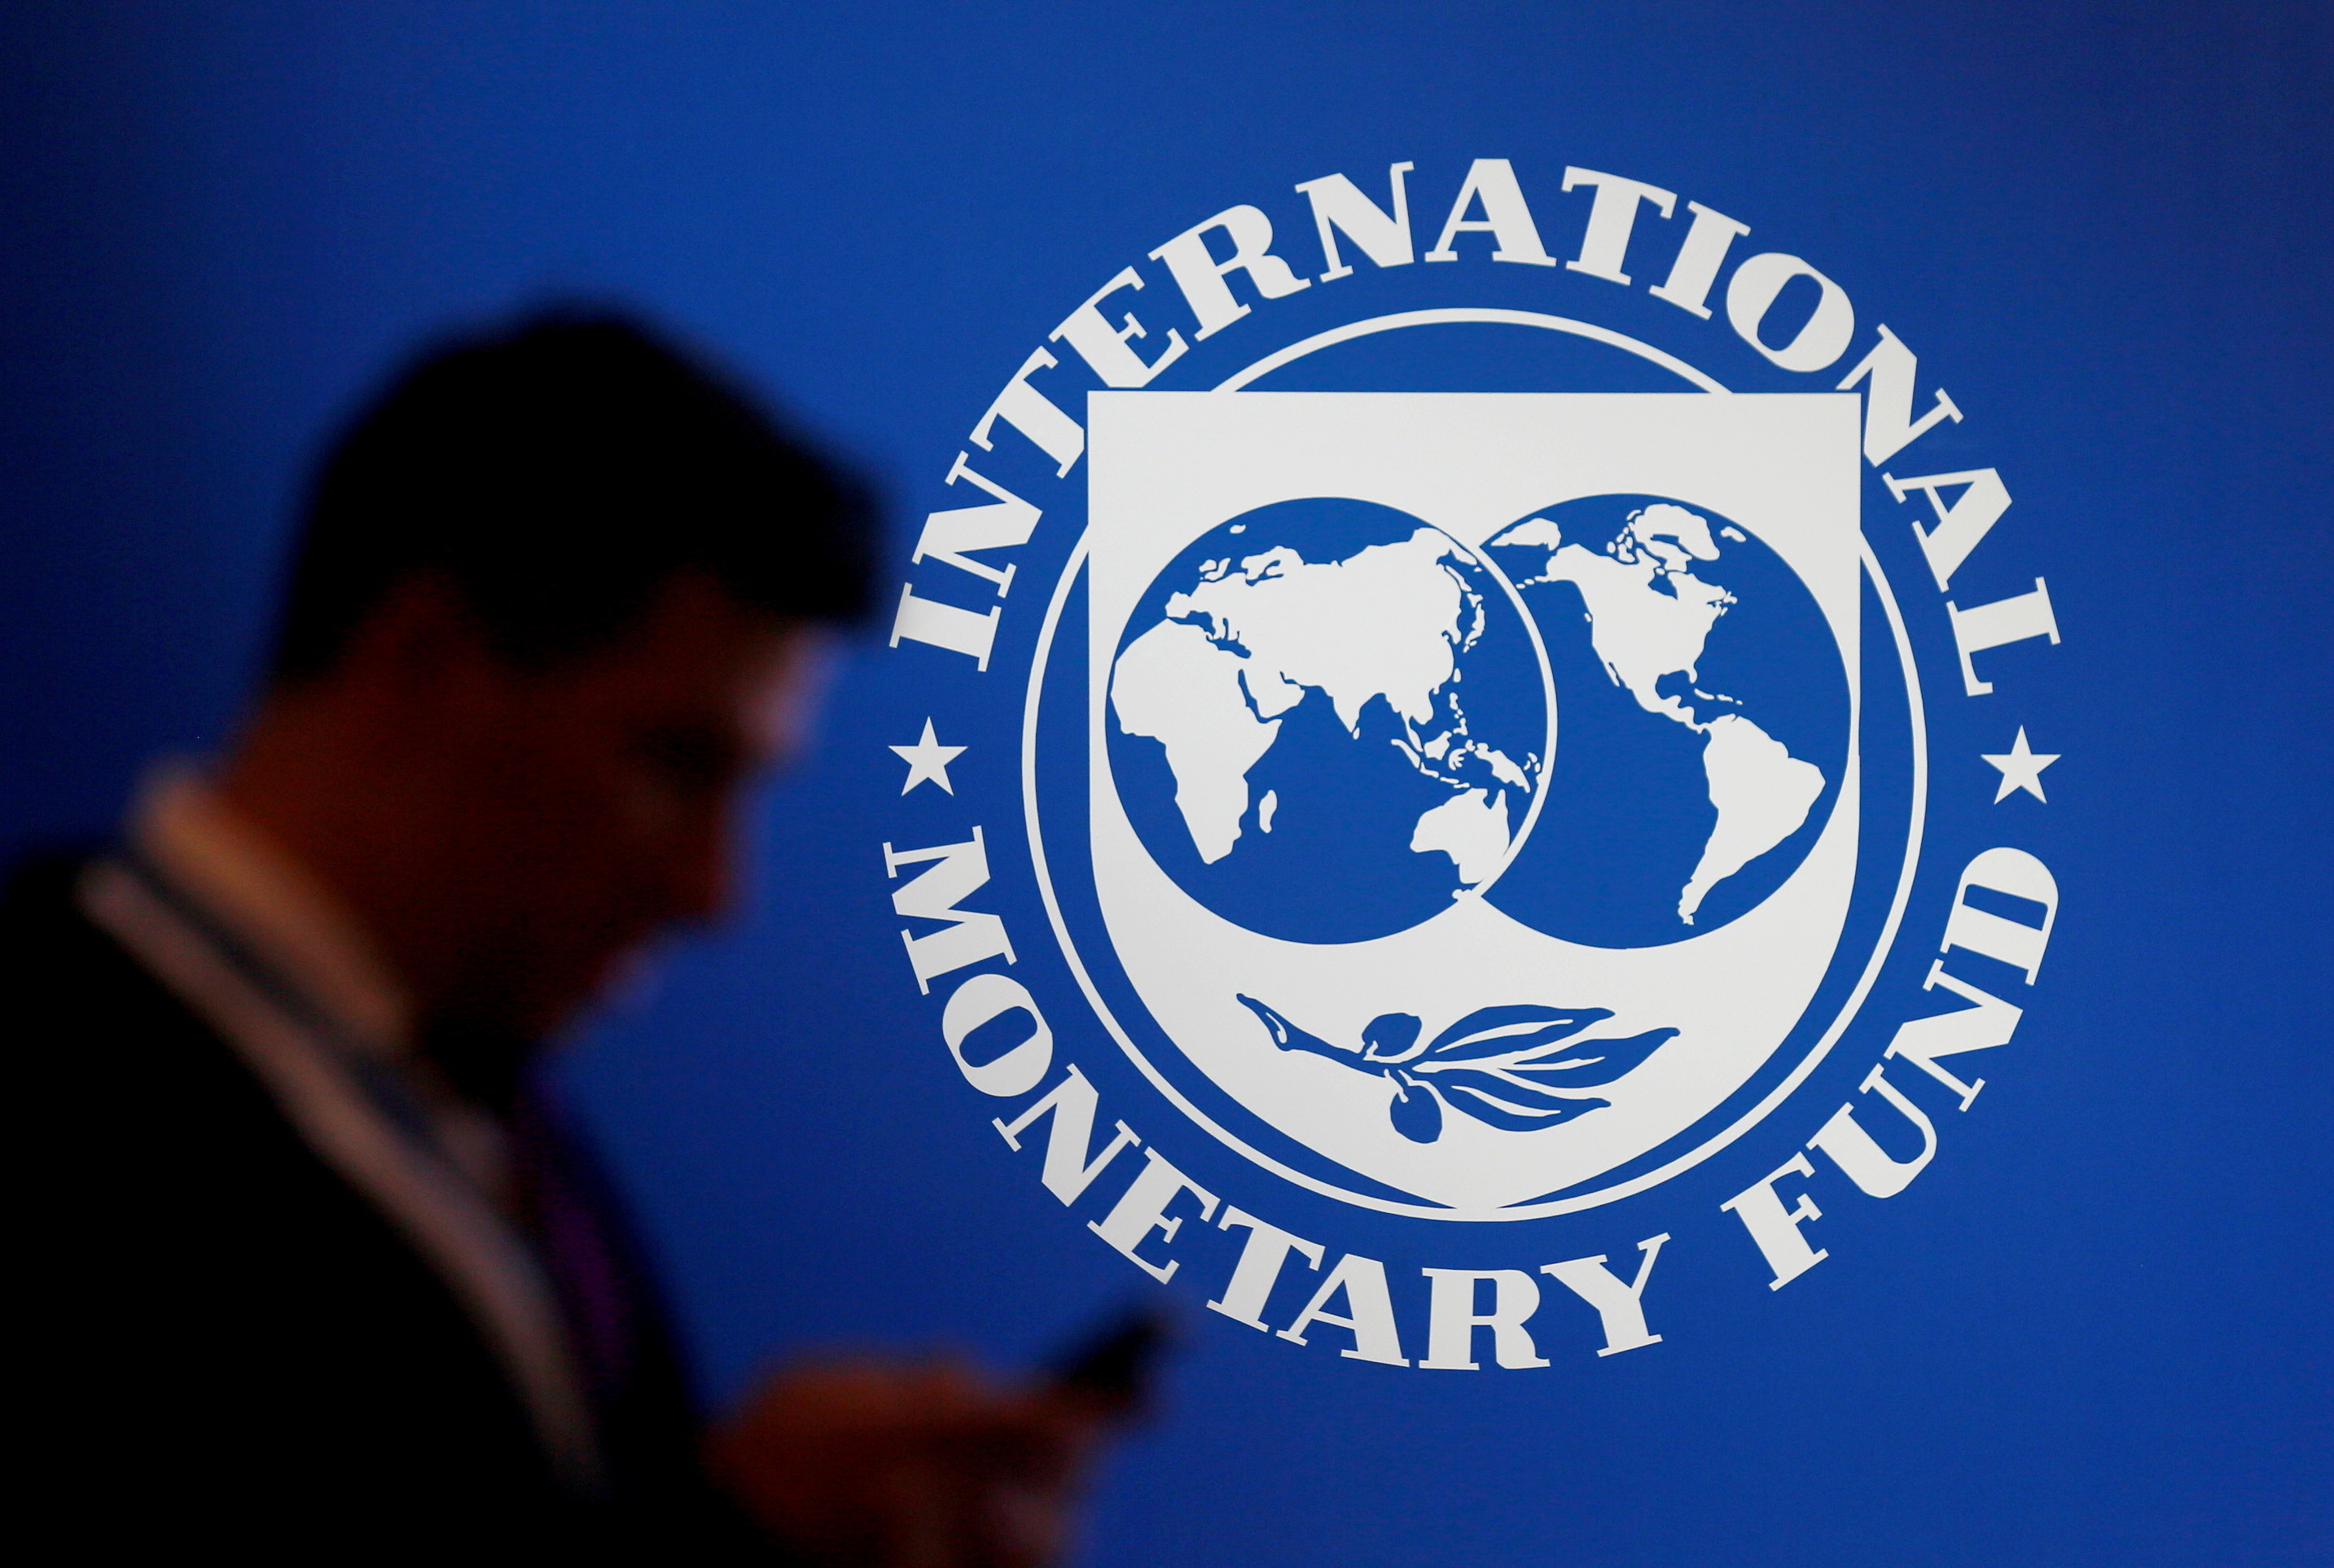 The International Monetary Fund (IMF) logo at a meeting in 2018. 